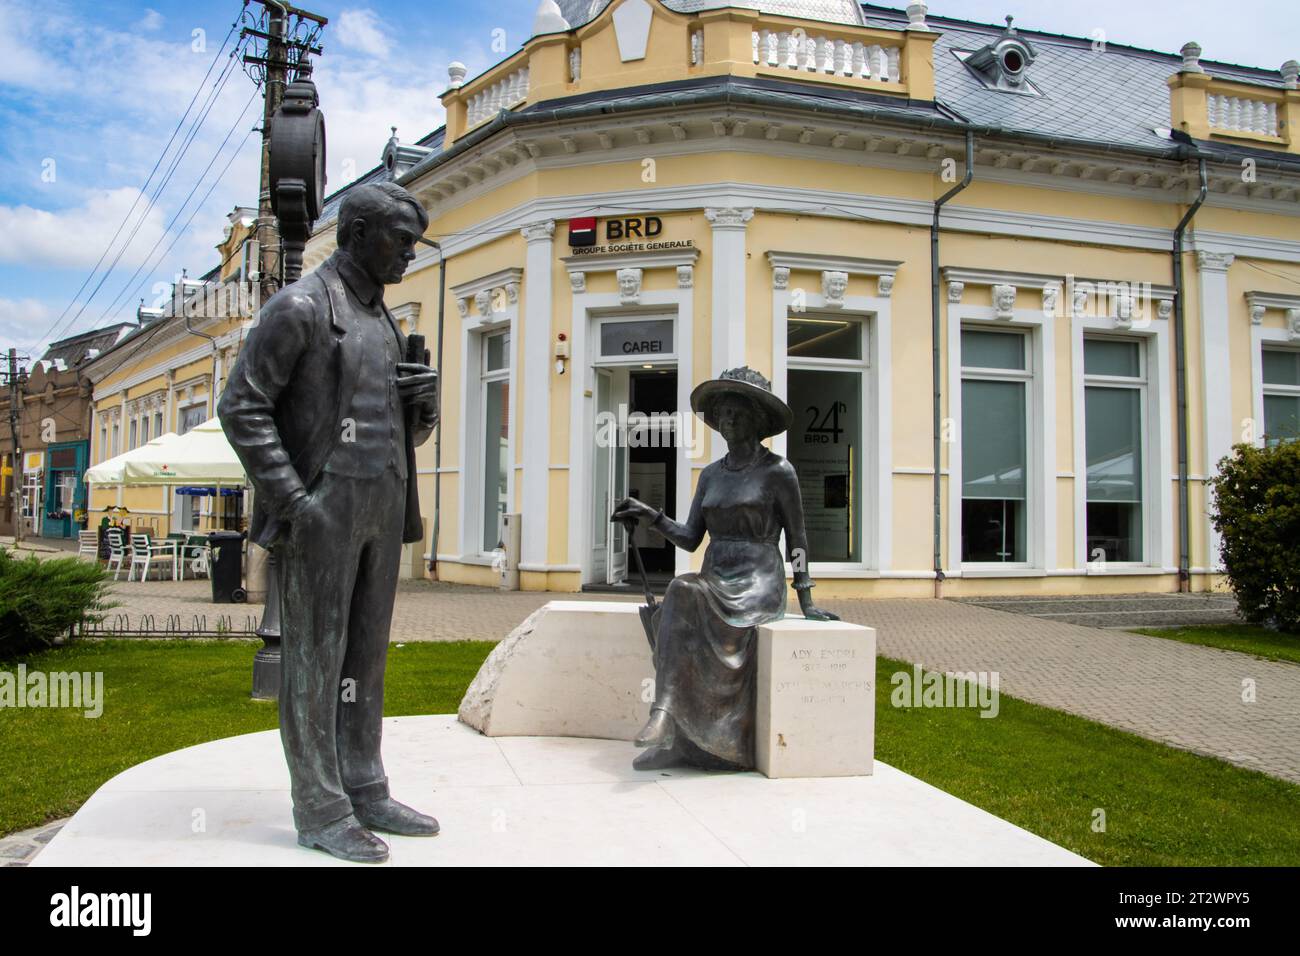 Statue of writer Otiliei Marchiș and poet Ady Endre situated in the center of Carei city, Satu Mare, Romania Stock Photo